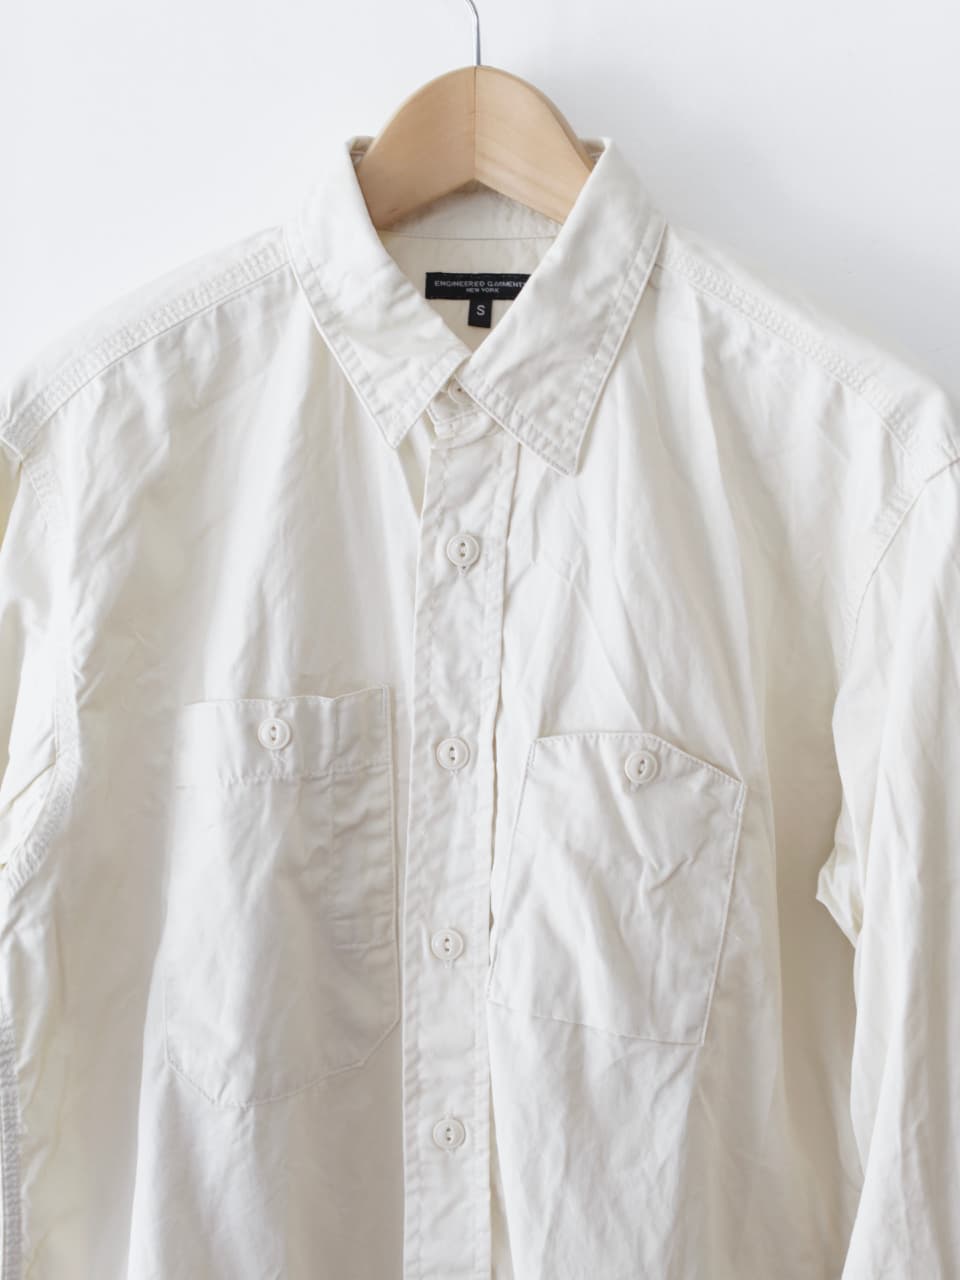 Work Shirt - Fineline Twill color Ivory 4